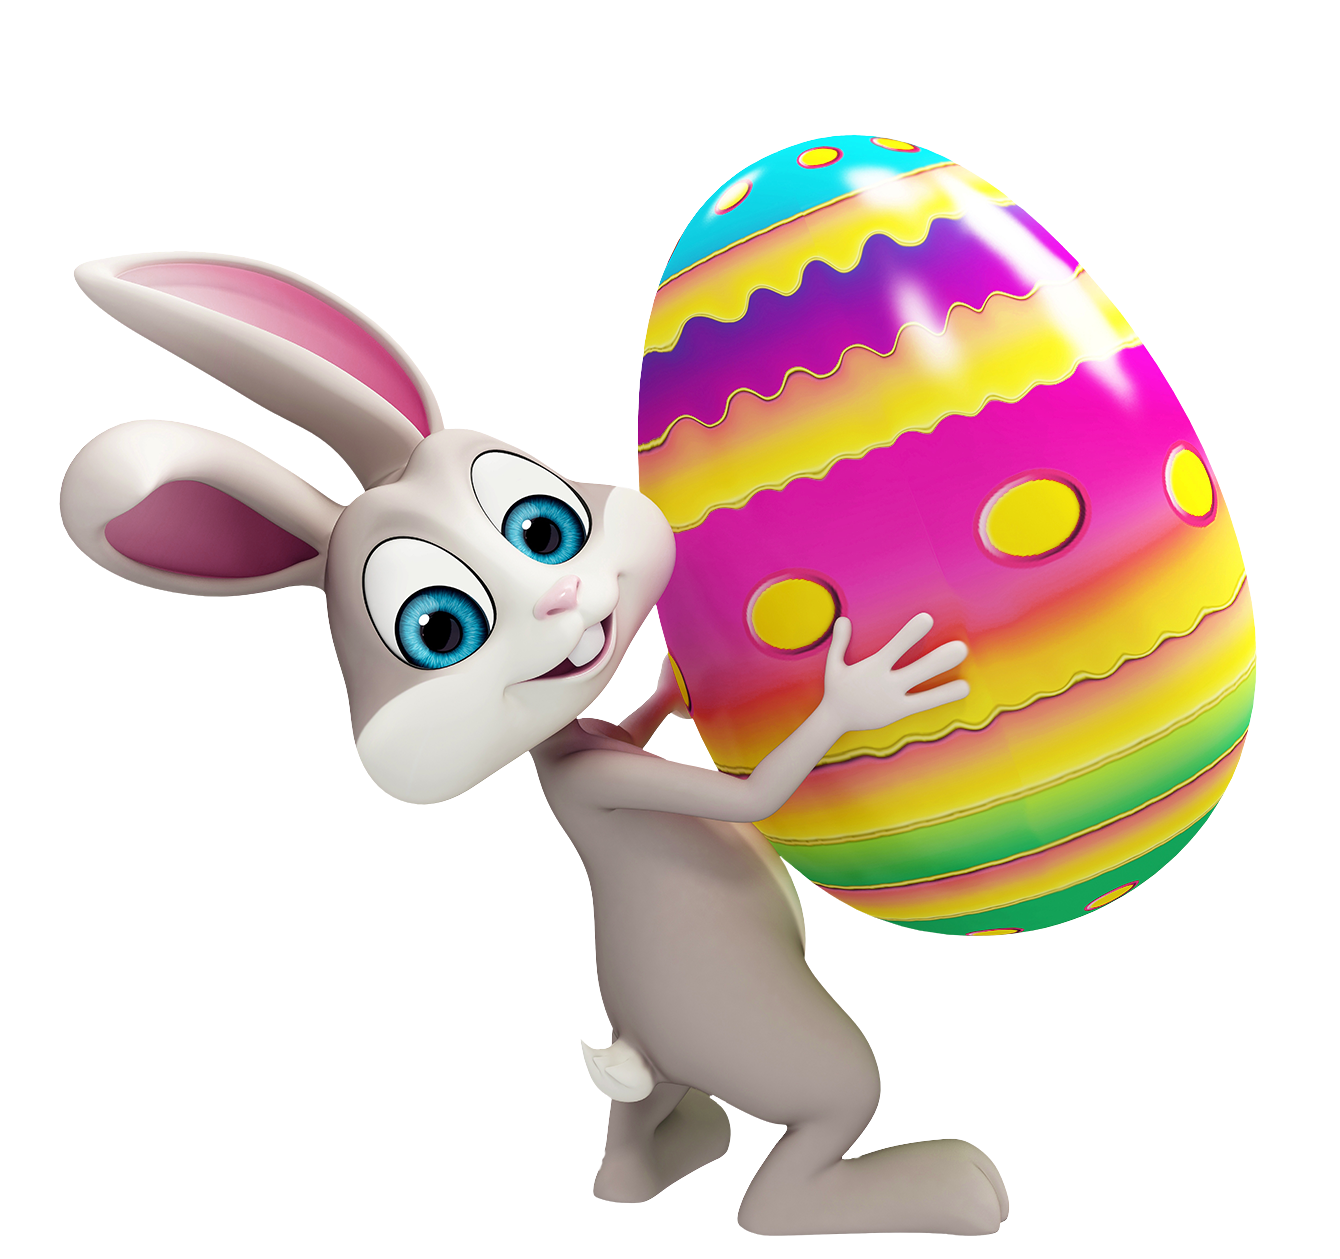 Easter Bunny PNG Picture